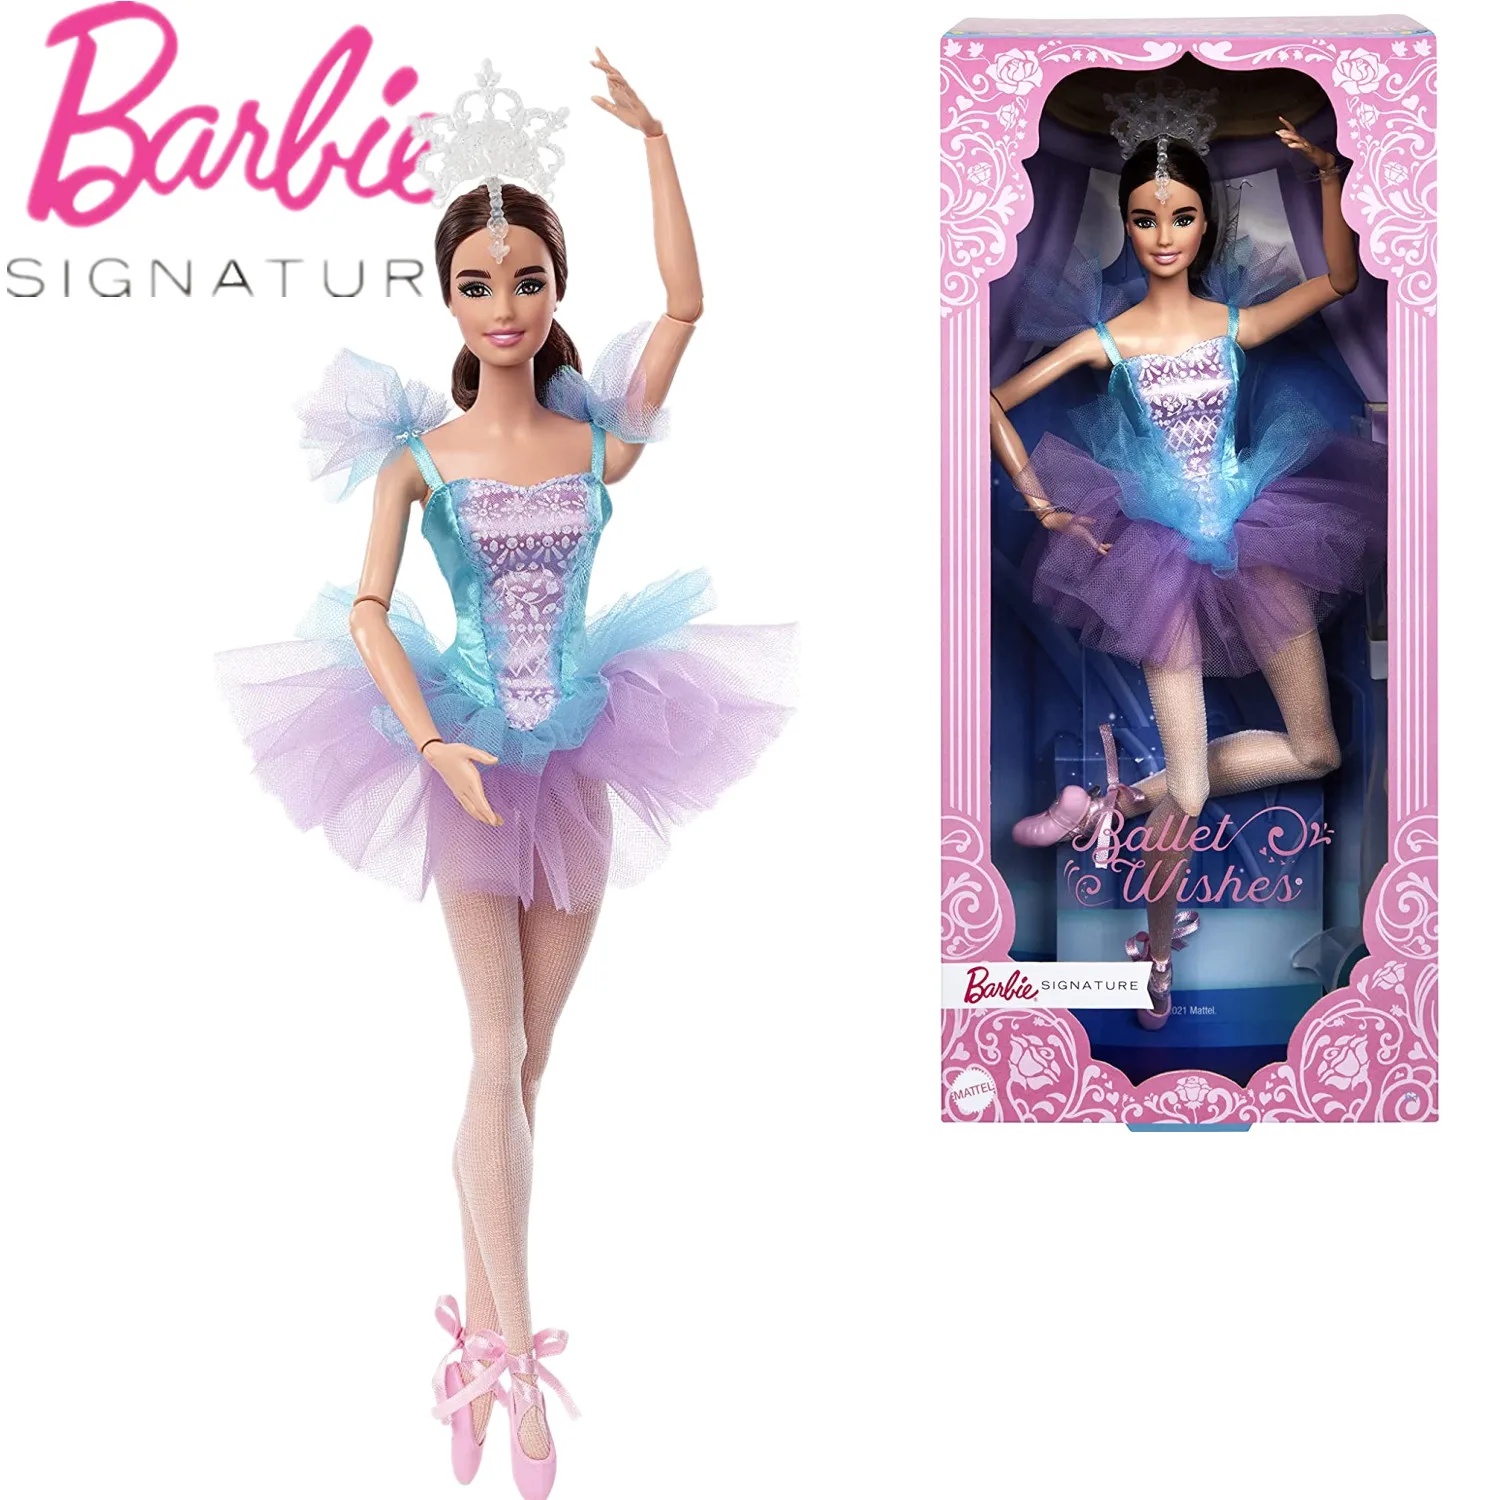 

Barbie Signature Ballet Wishes Doll 2022 Wearing Ballerina Costume Tutu Pointe Shoes & Tiara Edition Toy Kids & Collectors Gift